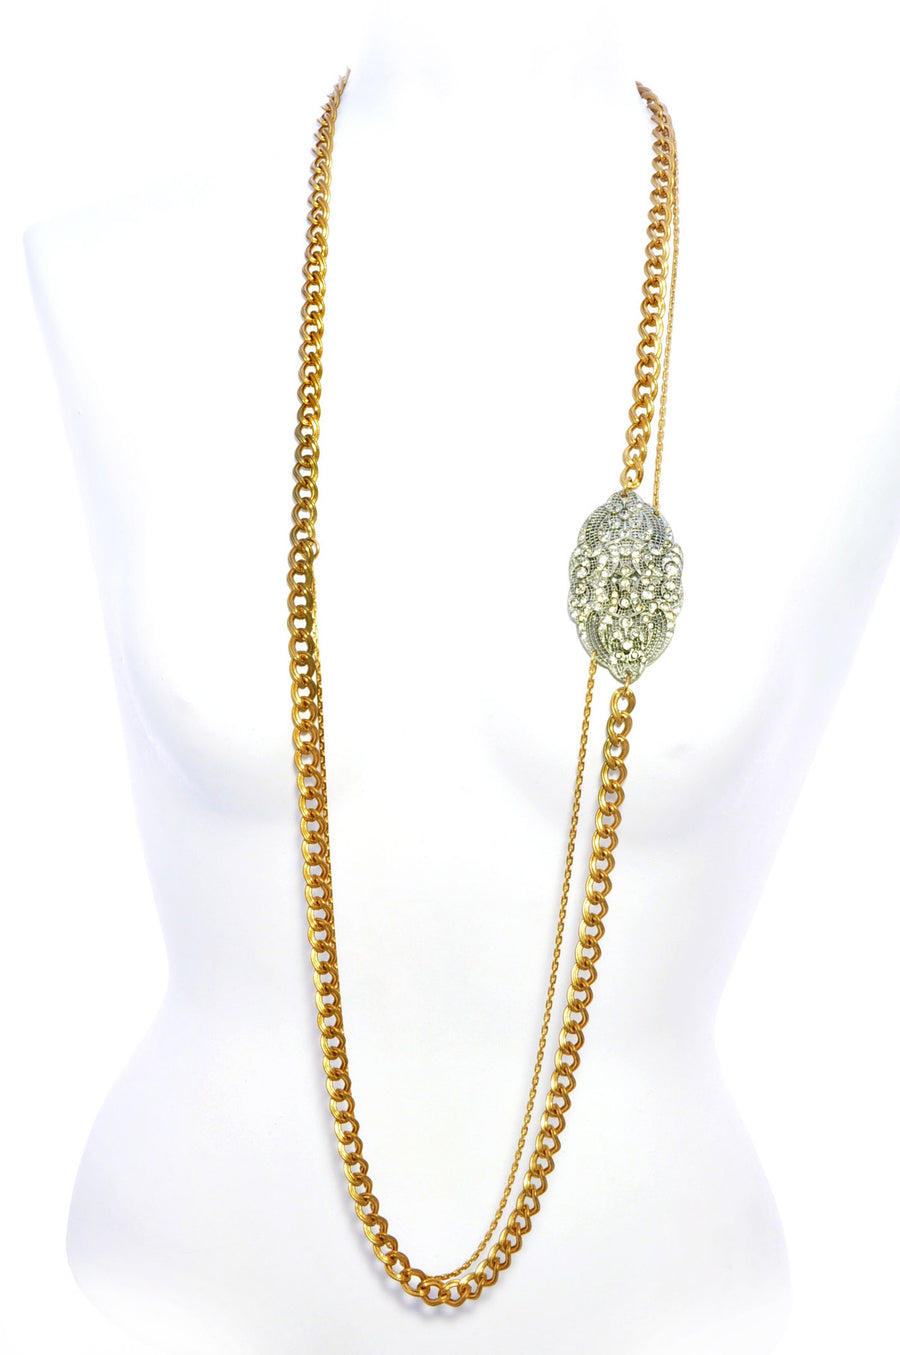 Long thick & thin strand chain necklace with diamante detail.Front